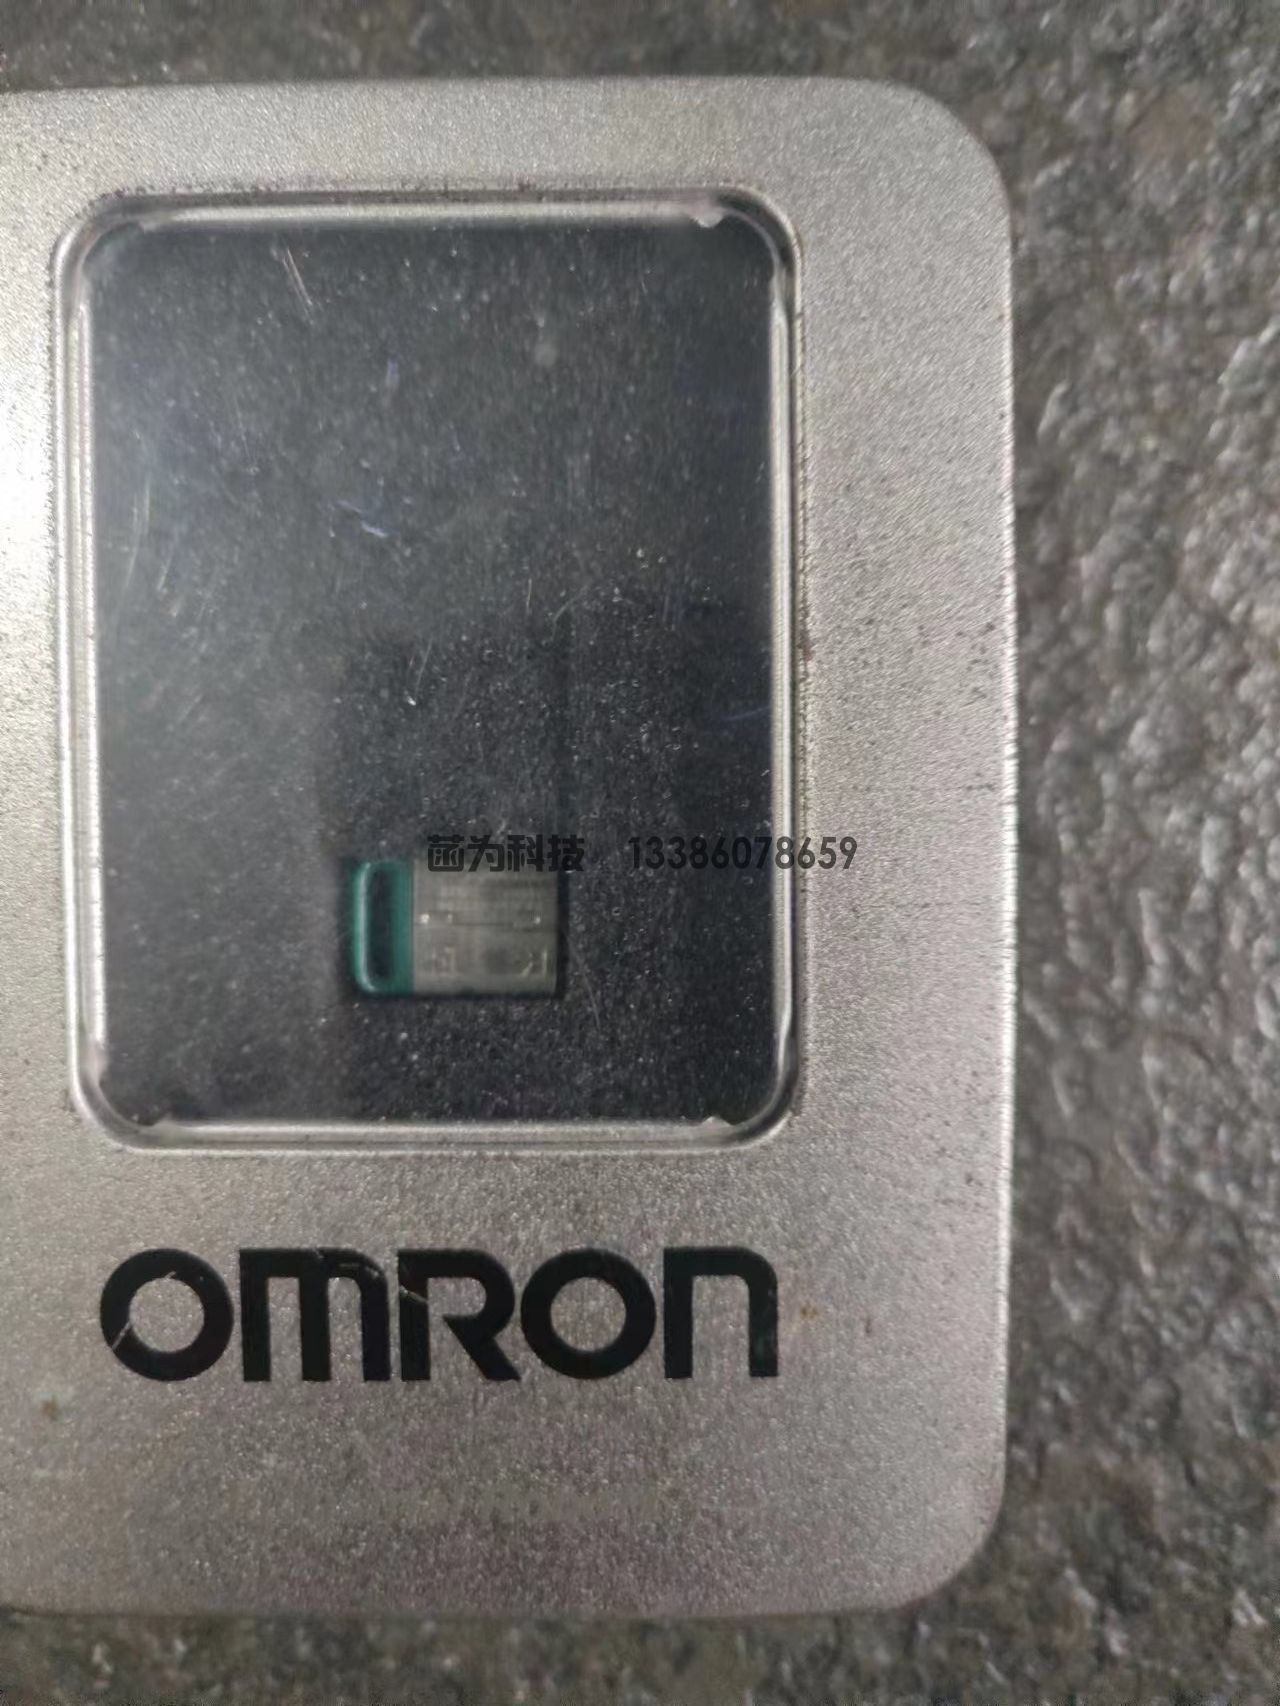 Omron Visual tracking authorization P/N:09187-010